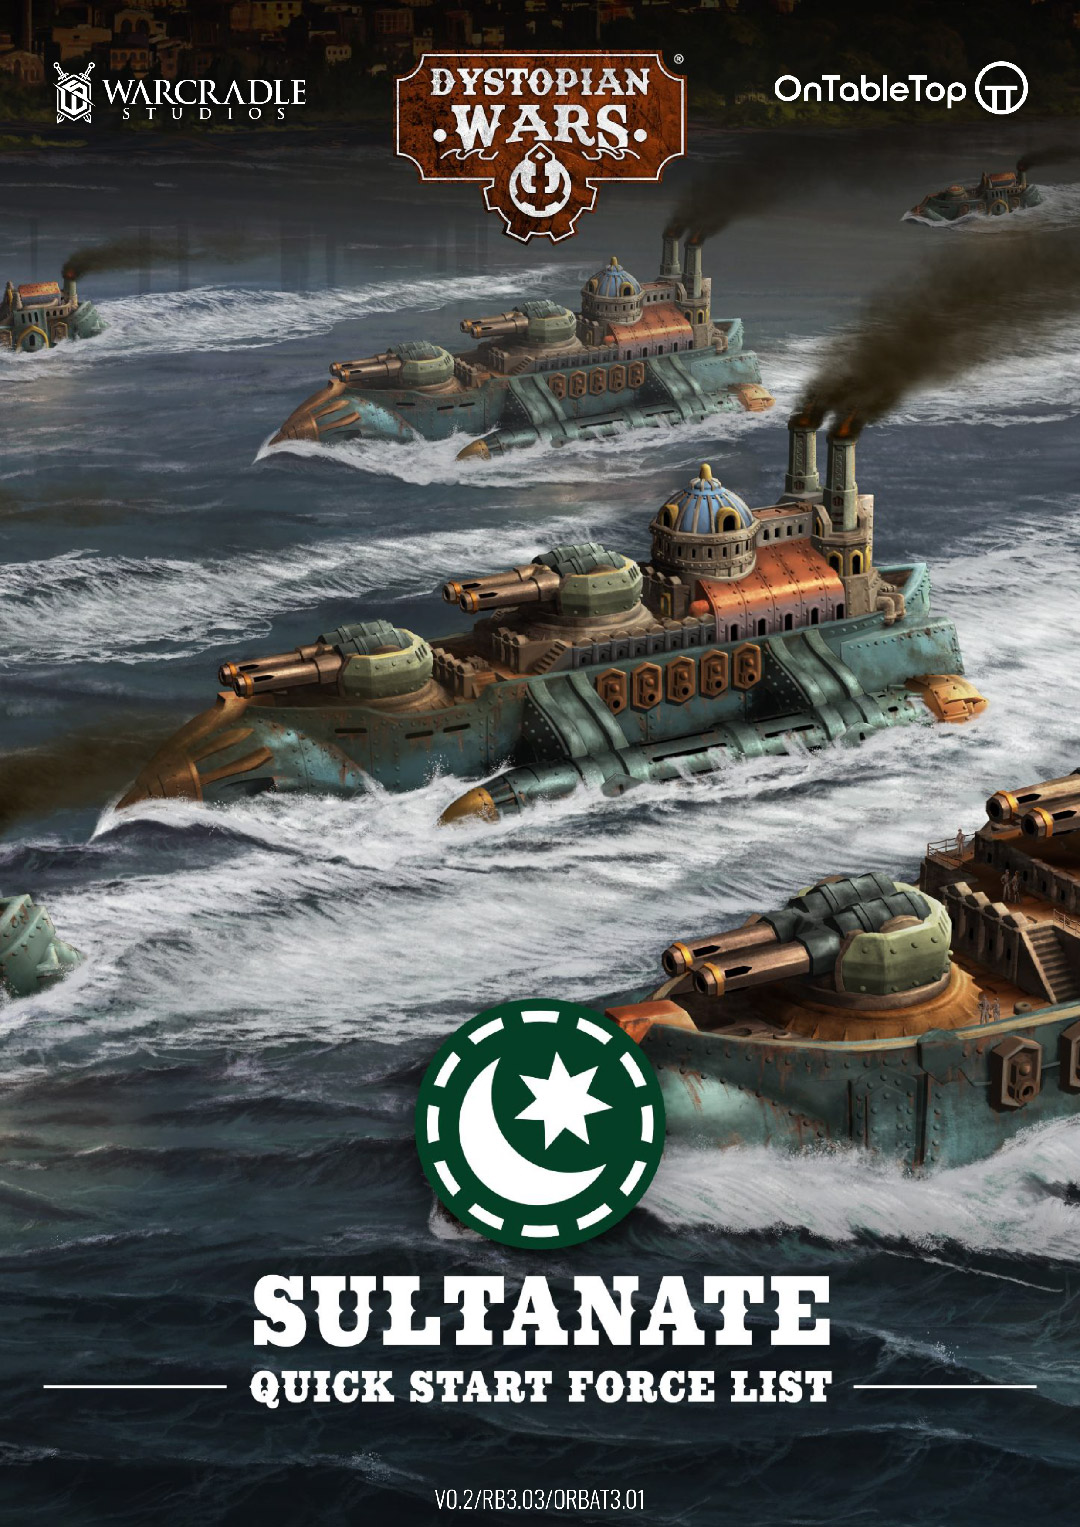 Sultanate-Dystopian-Wars-Quick_Start_Force_List-Cover